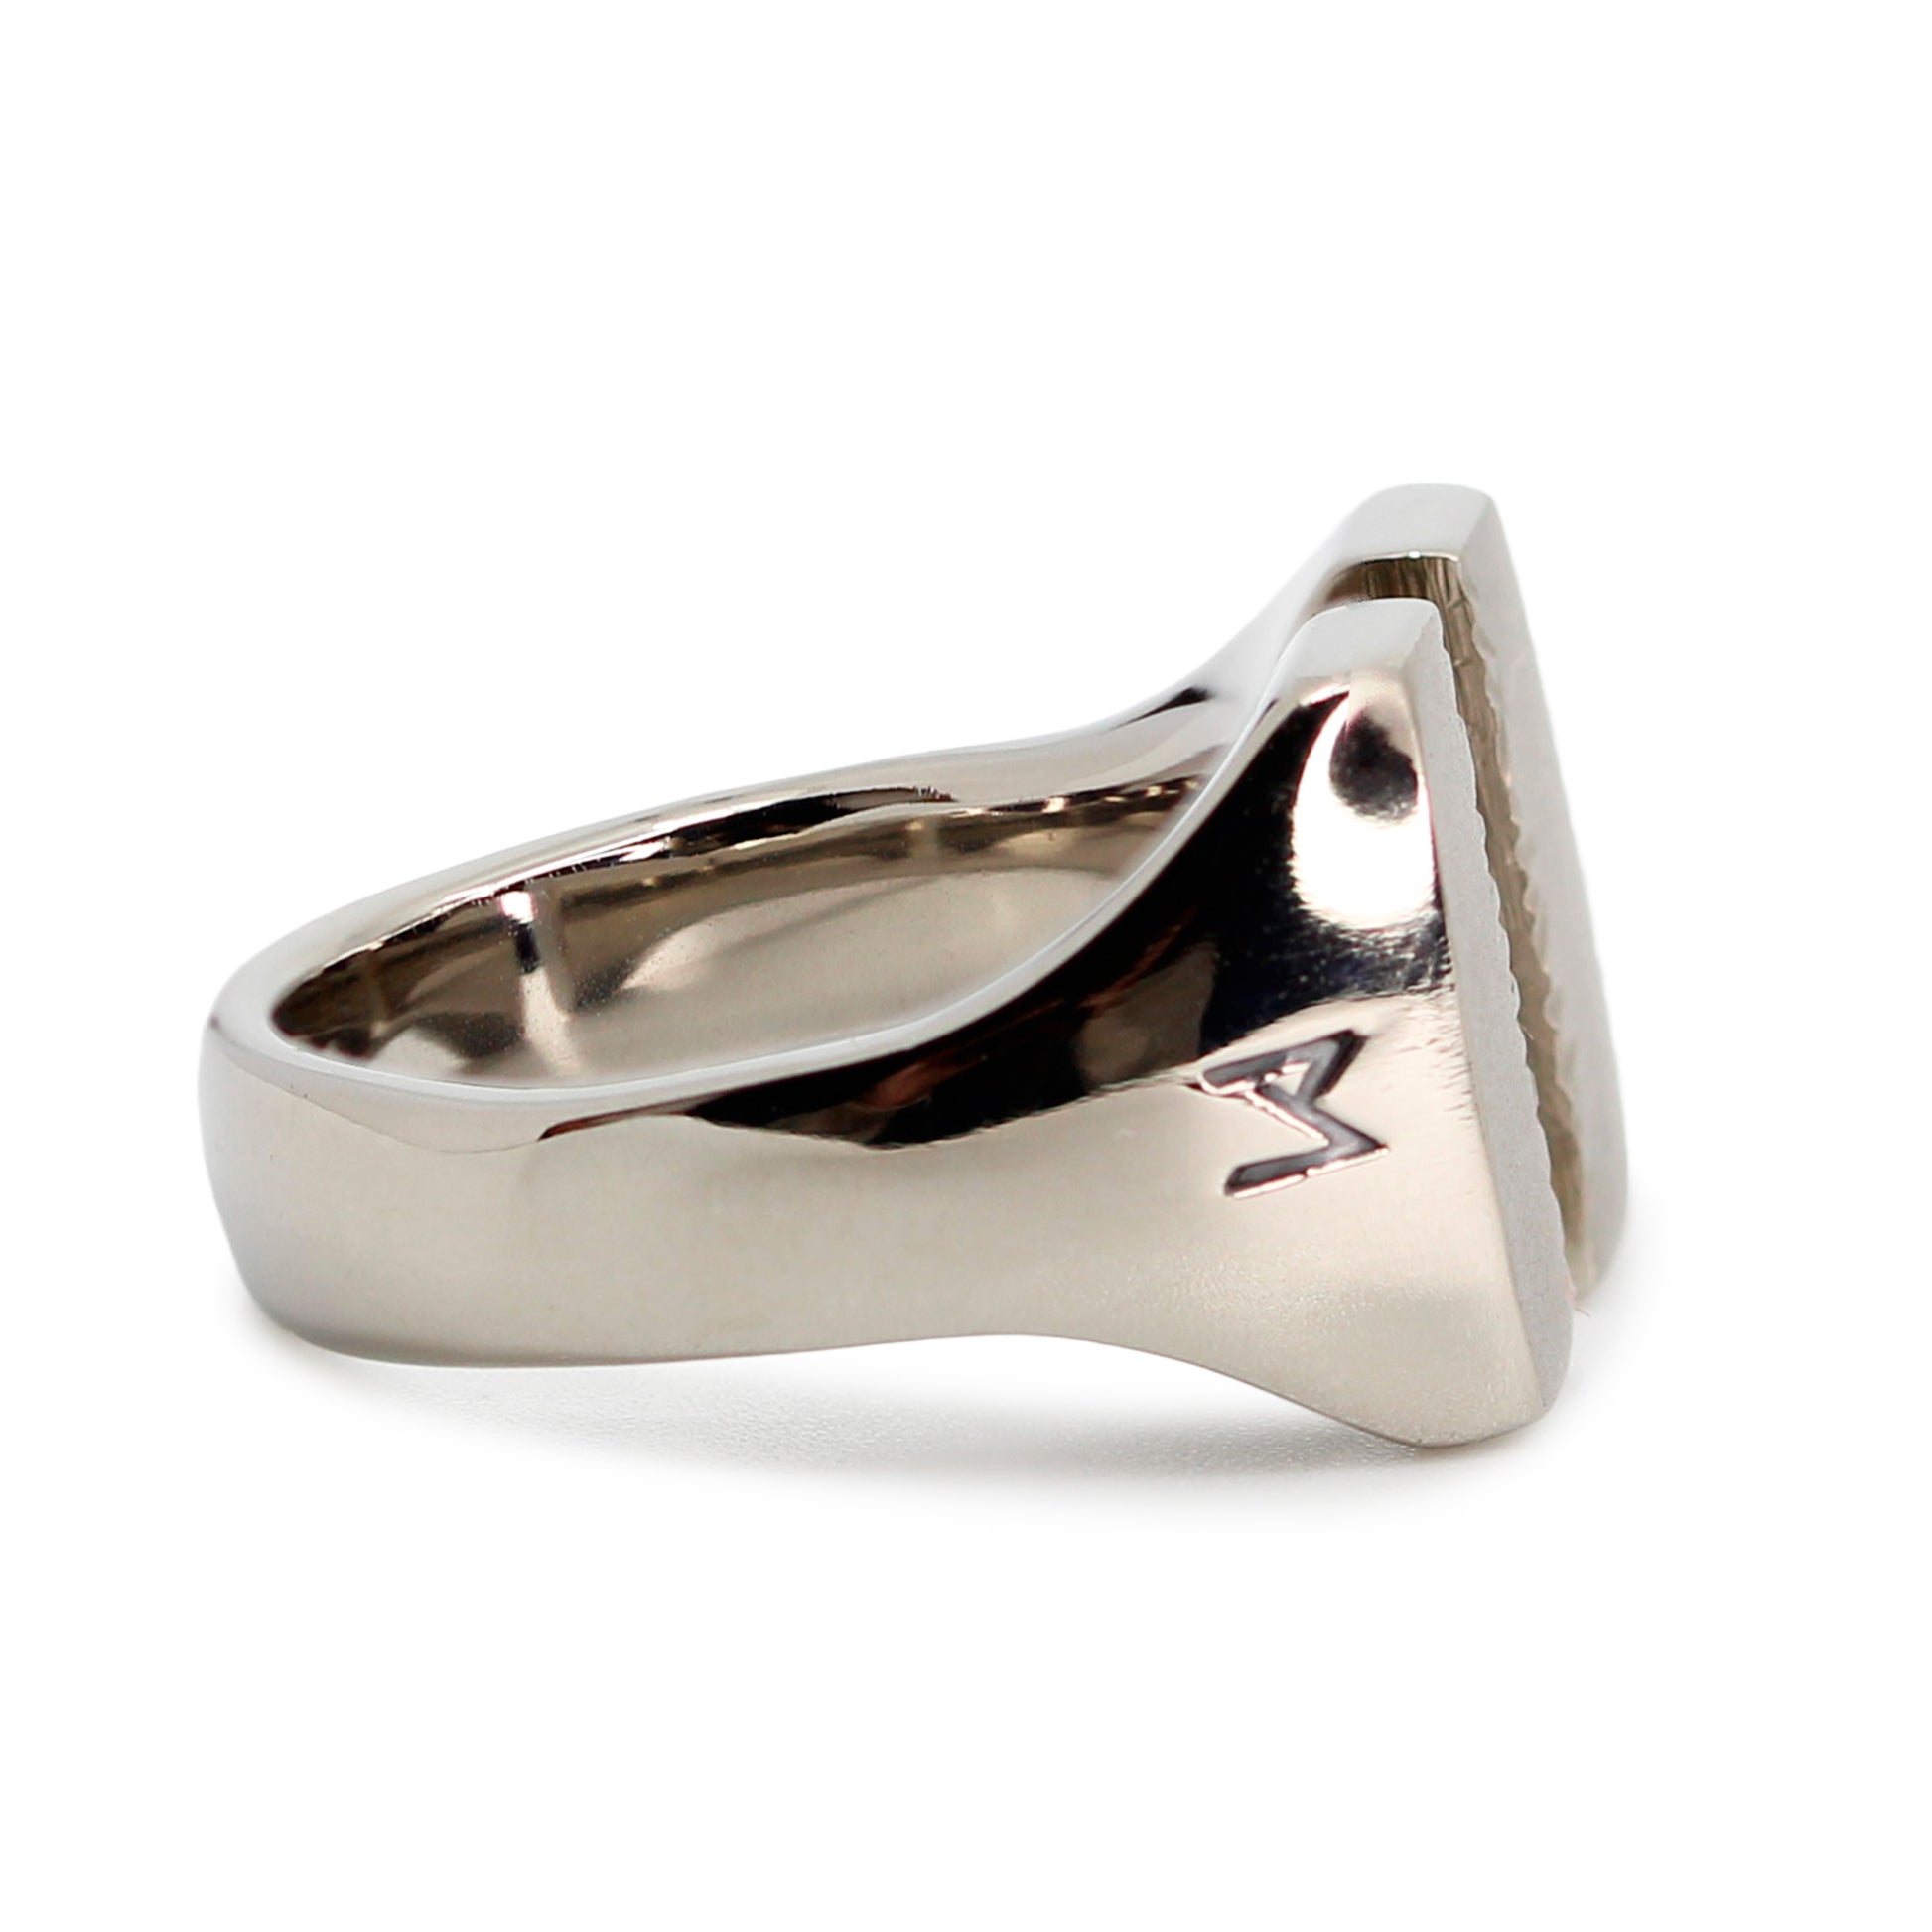 Single silver-colored titanium signet ring, 15x15 mm wide surface which has been cut through the middle. Image shows side view of the ring